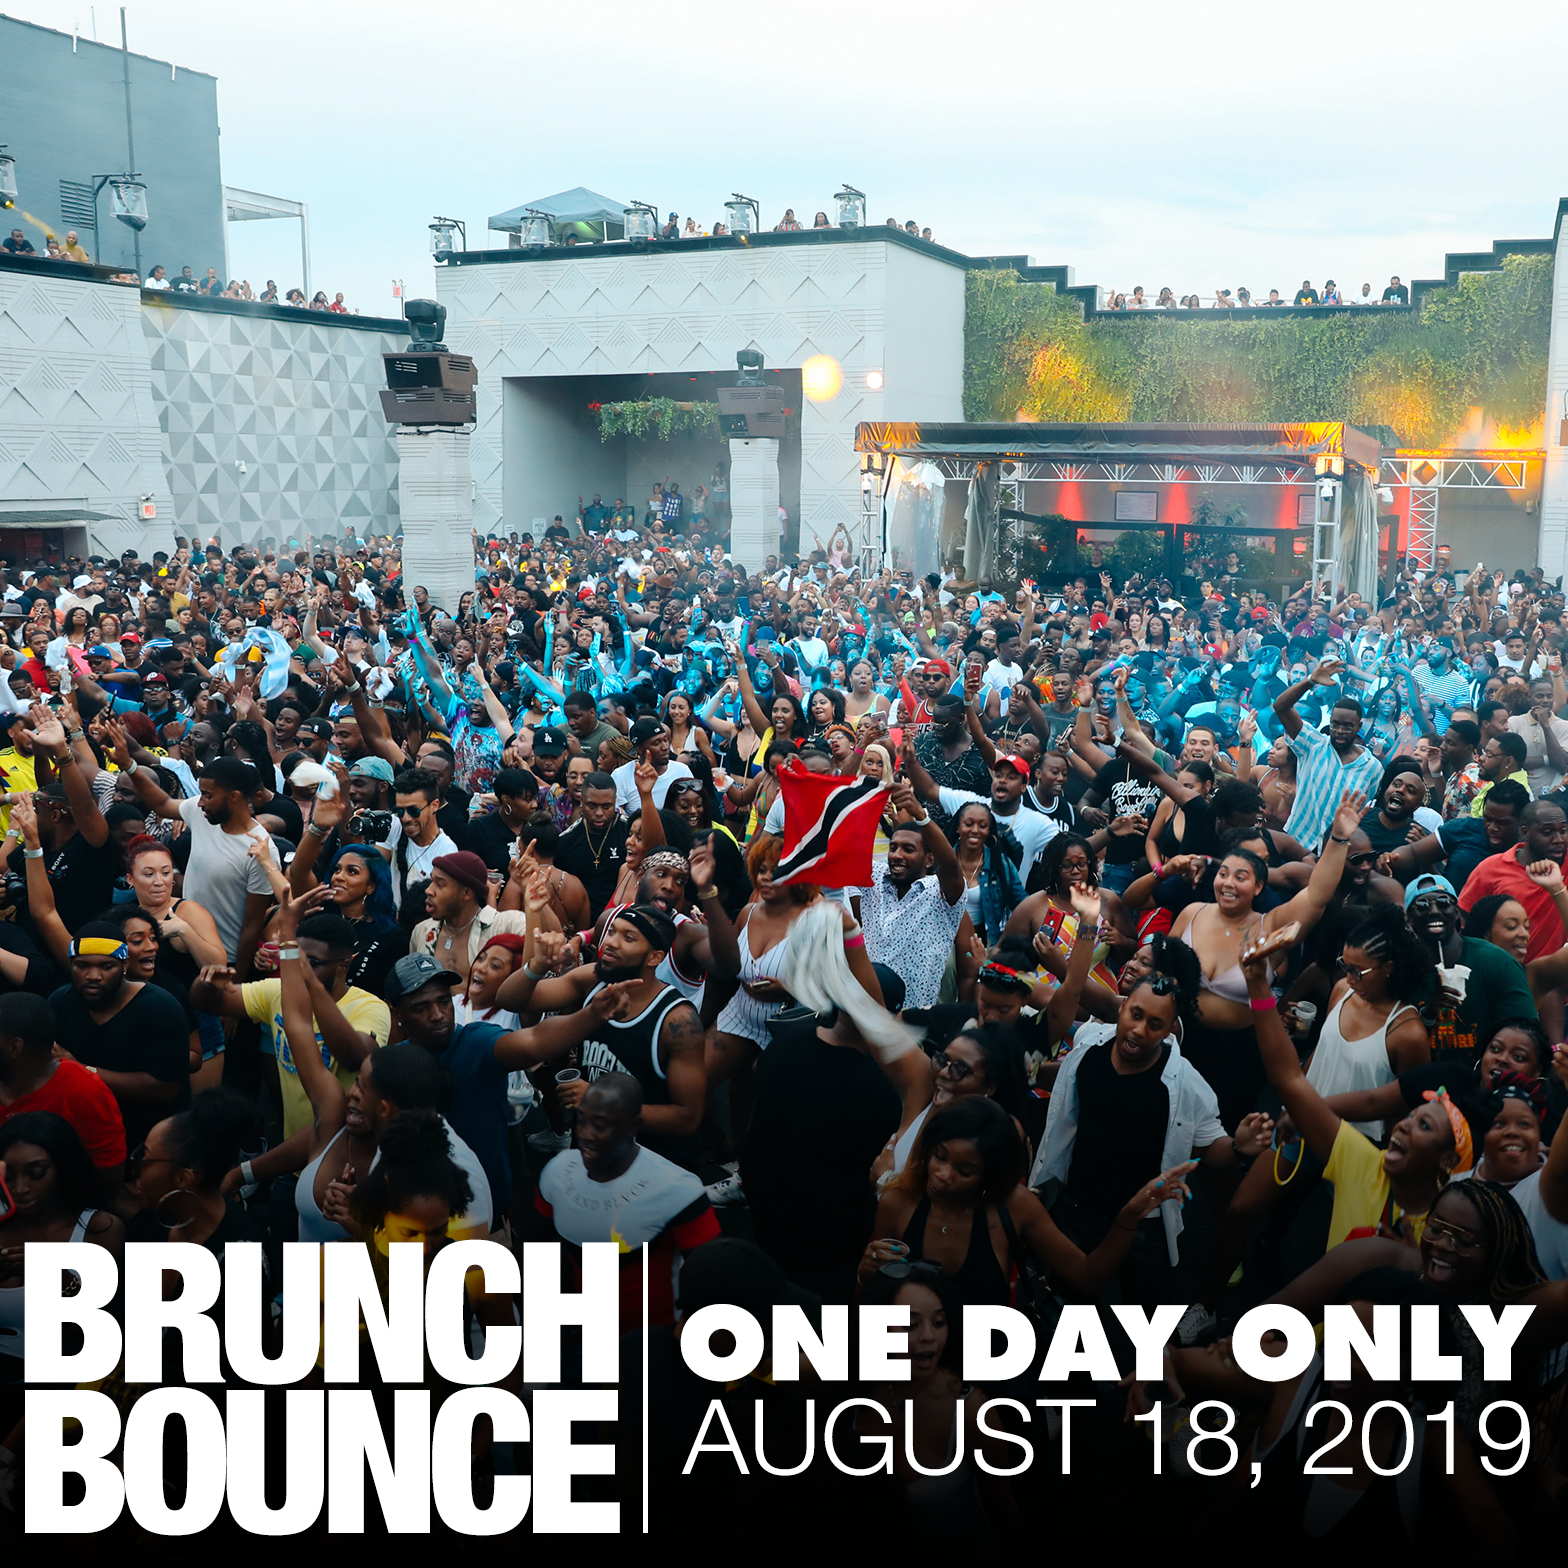 One Day Only August 18, 2019